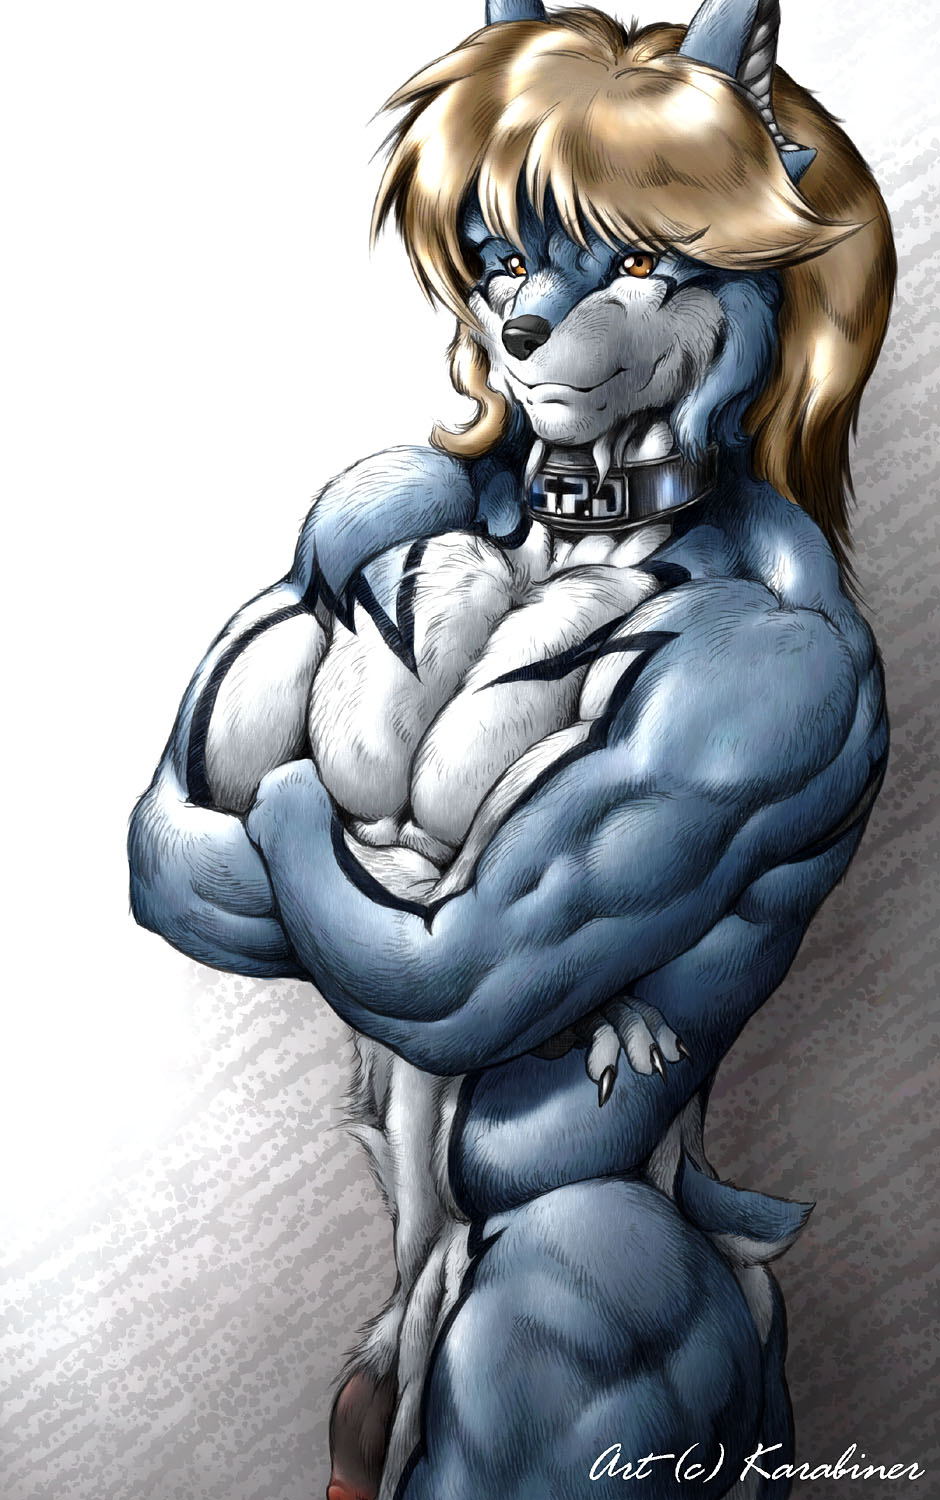 anubis_kruger blonde_hair brown_eyes buff canine collar doggy_kruger hair karabiner male nude penis power_rangers solo